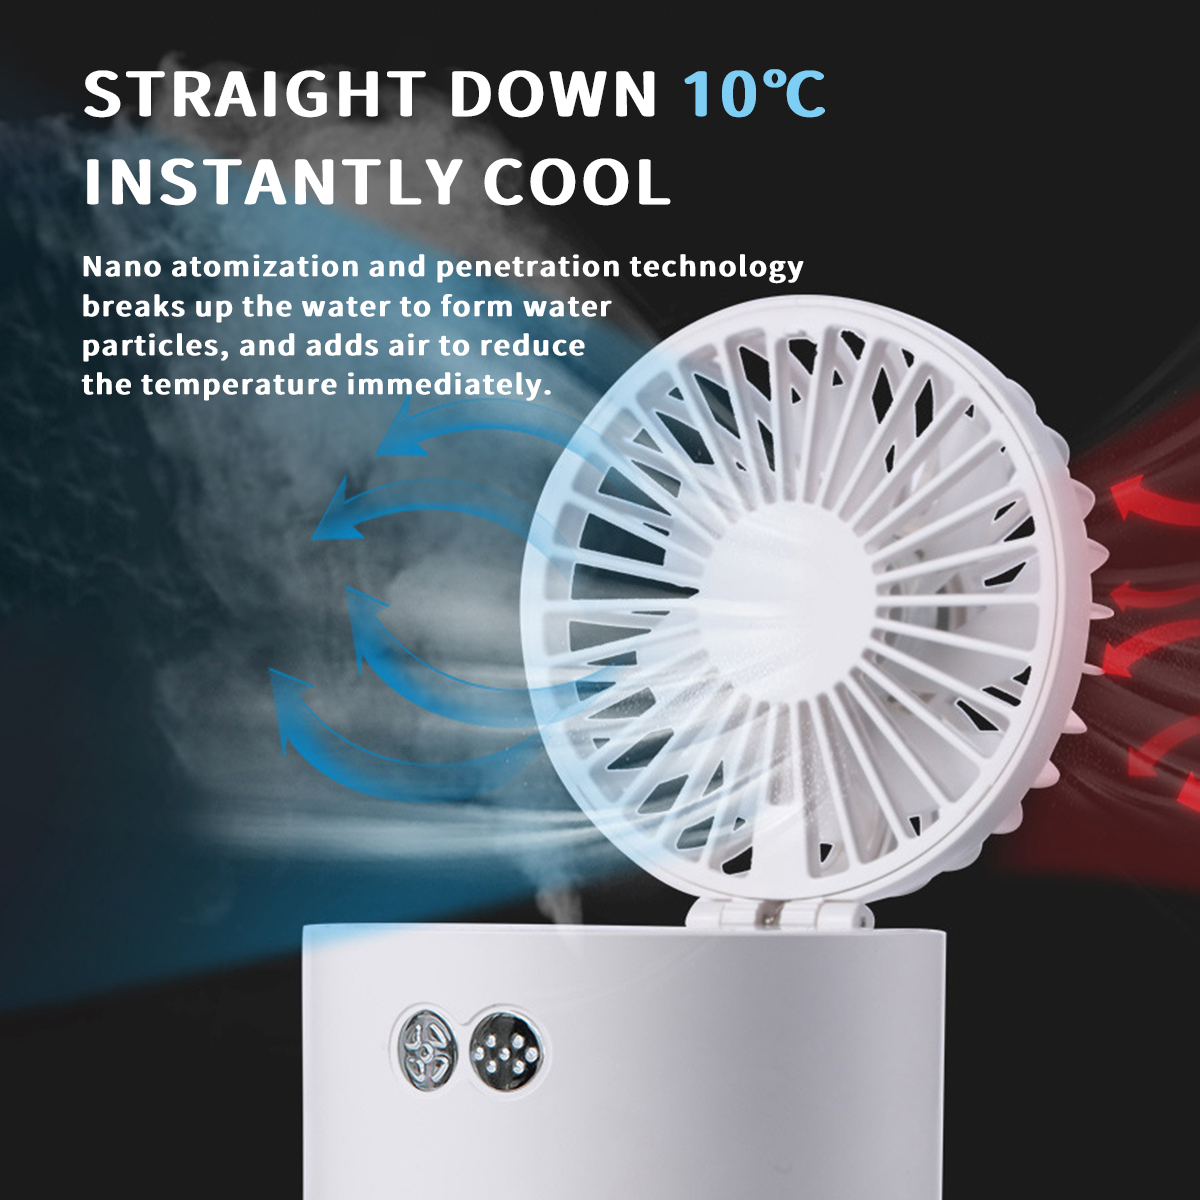 Multifunctional-2000mAh-Mini-USB-Rechargeable-Fan-Cooler-Desktop-Spray-Humidification-with-Colorful--1864518-6